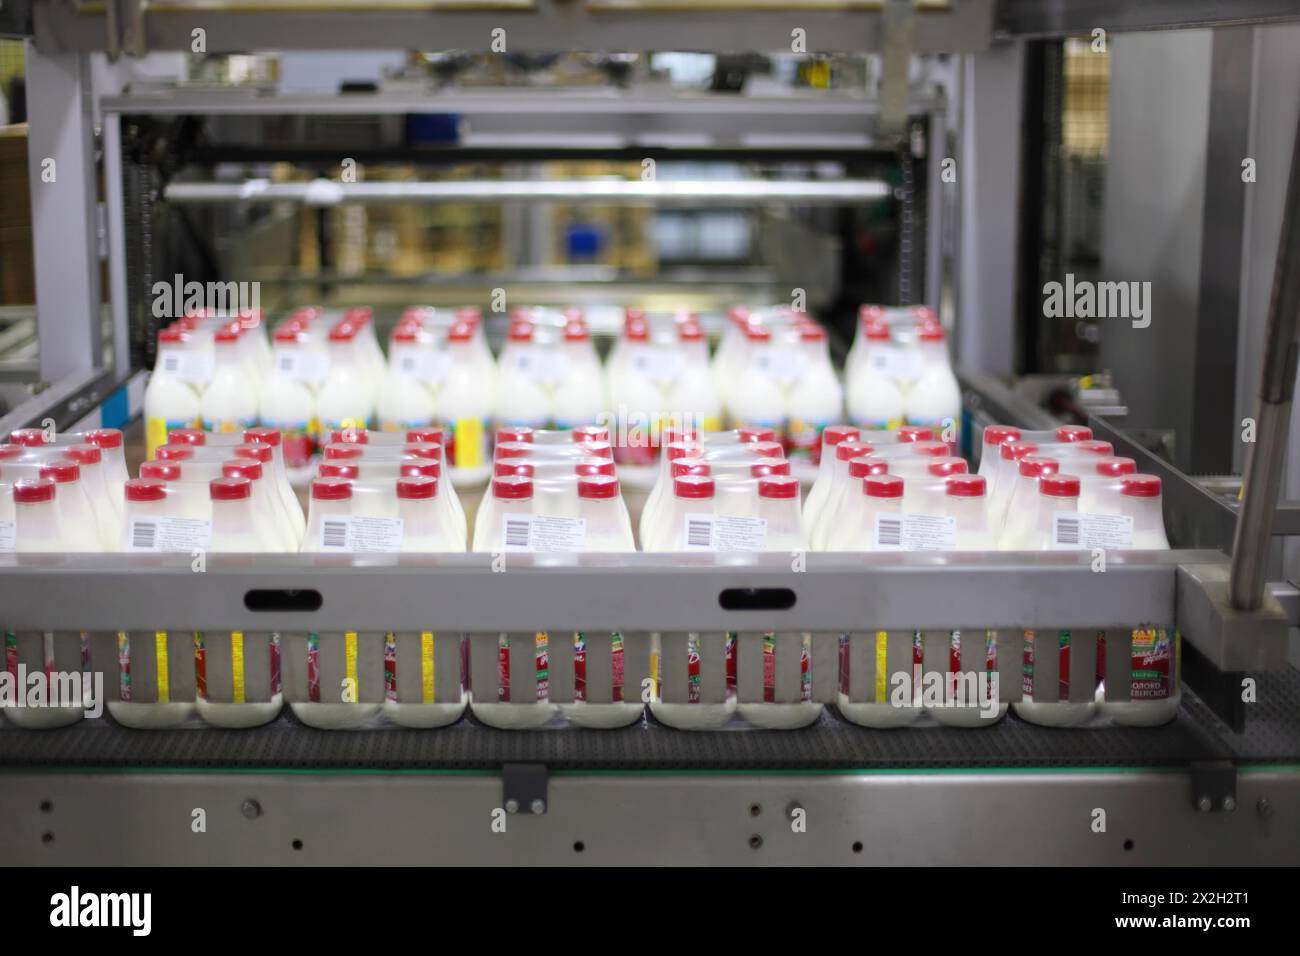 MOSCOW - MARCH 3: Conveyor with milk at Wimm-Bill-Dann plant, on March 3, 2011 in Moscow, Russia. PepsiCo has spent more than $6 billion to buy juice Stock Photo